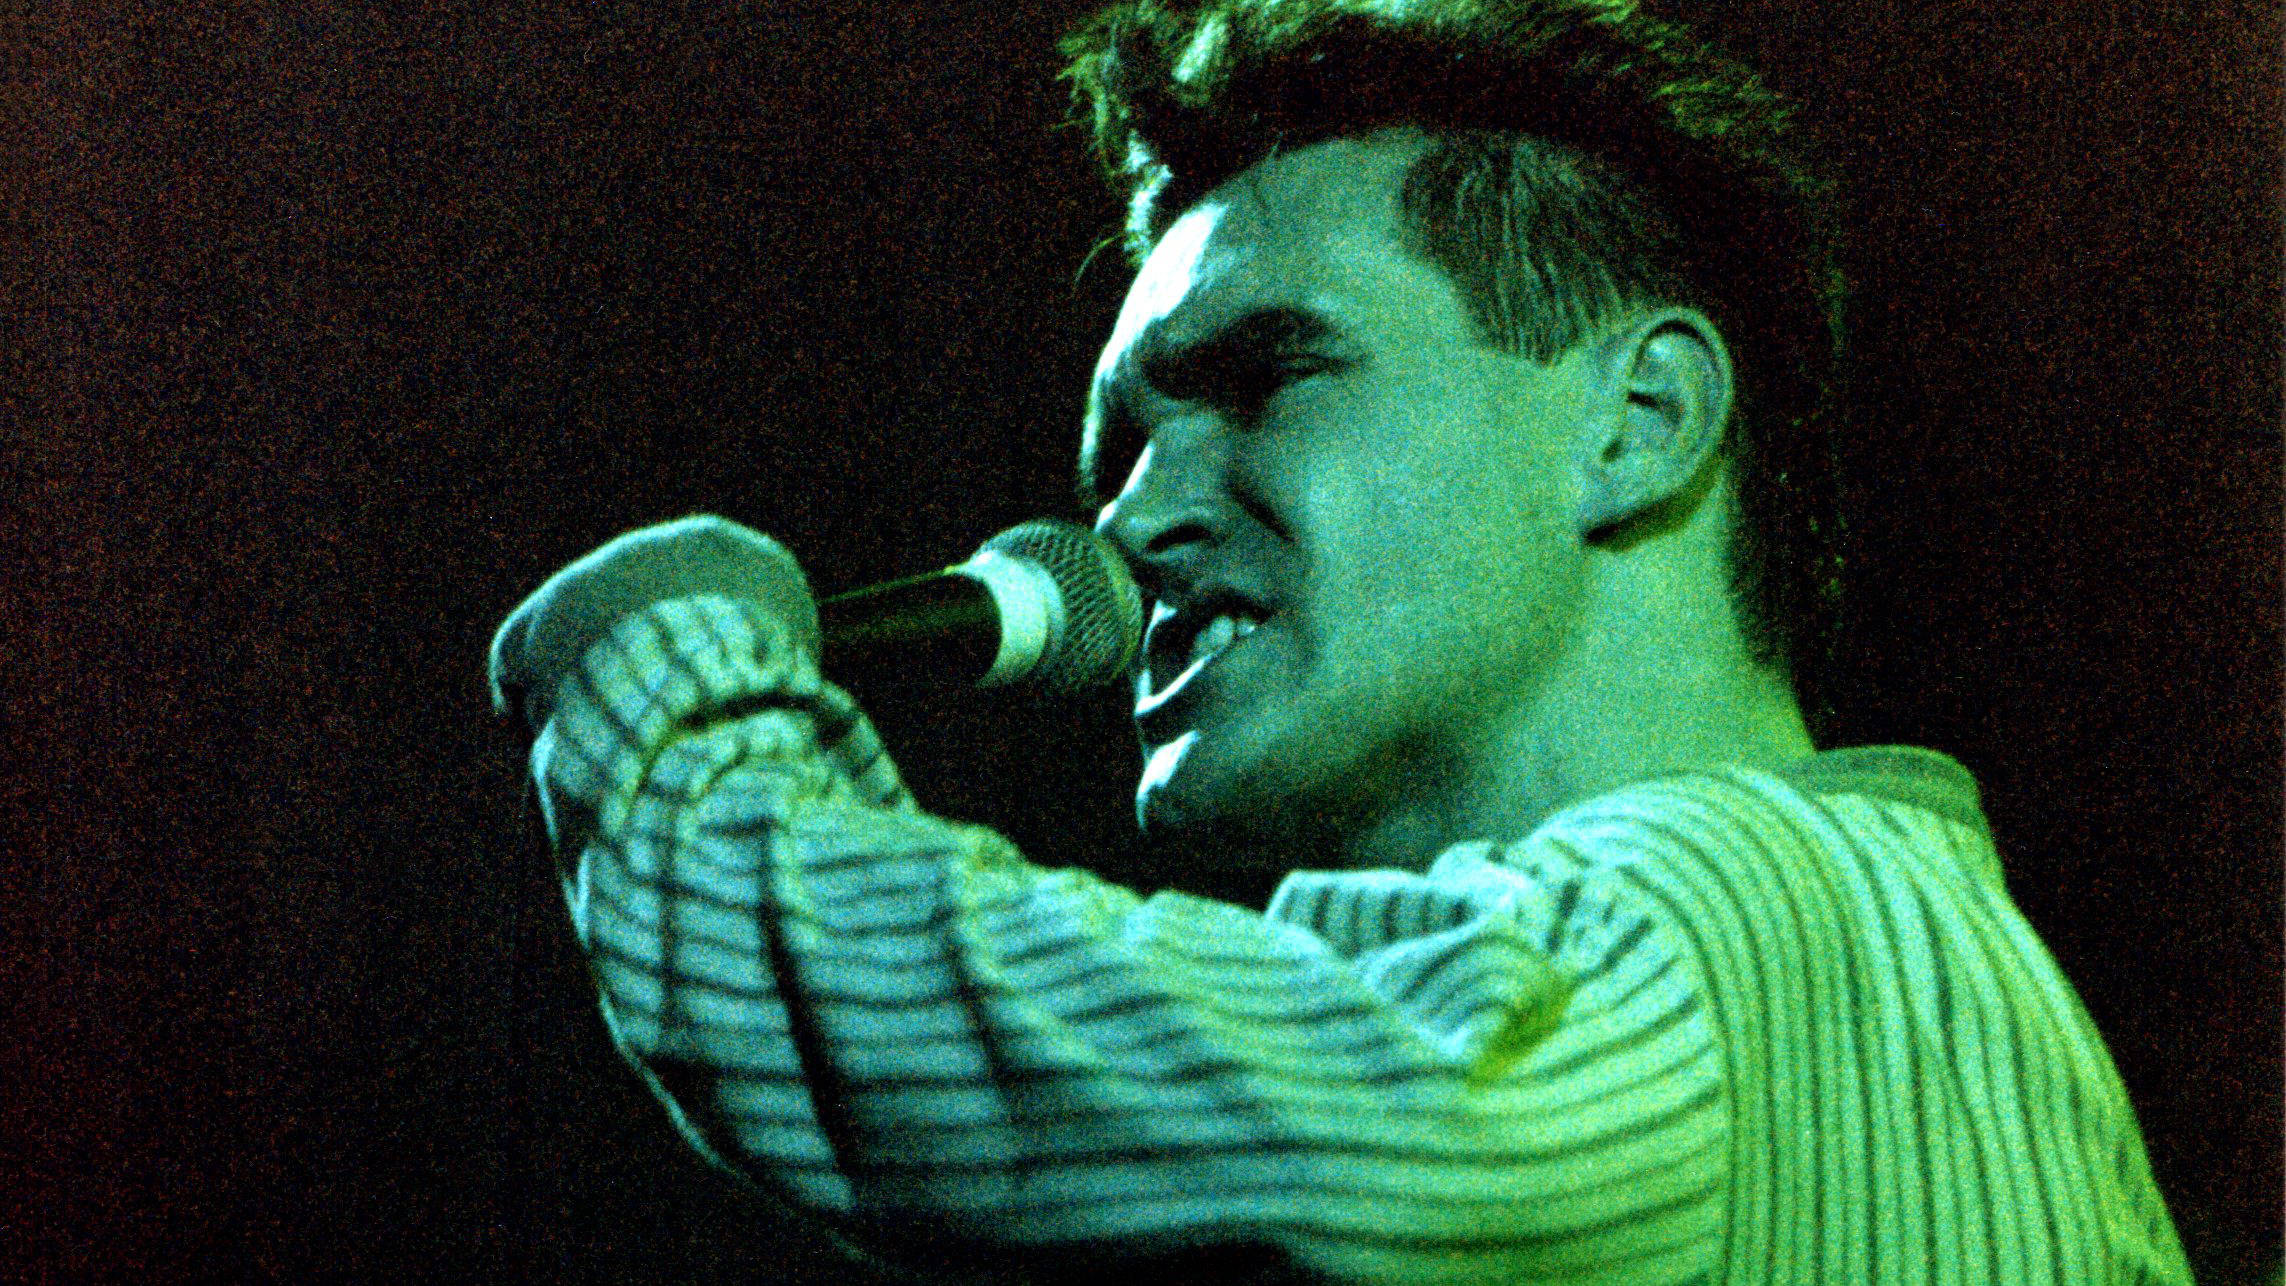 Morrissey 8x10 Photo Print The Smiths Concert Performance Moz 